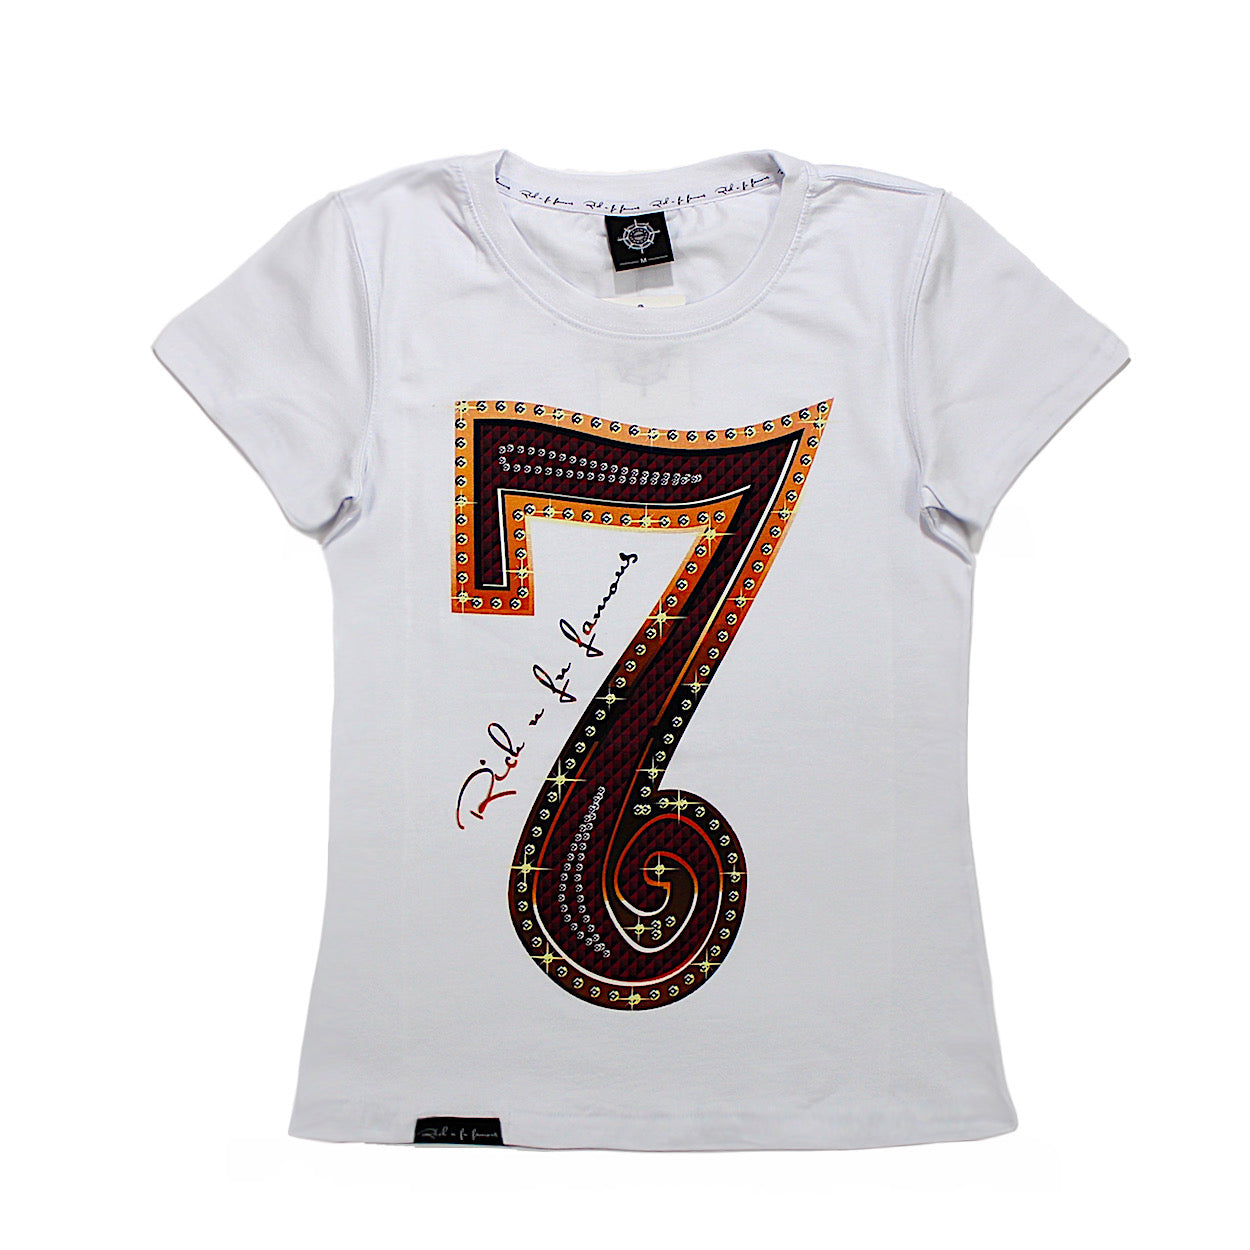 Women's Premium Fitted Tee Lucky 7 Hi Quality Art Amazing Details